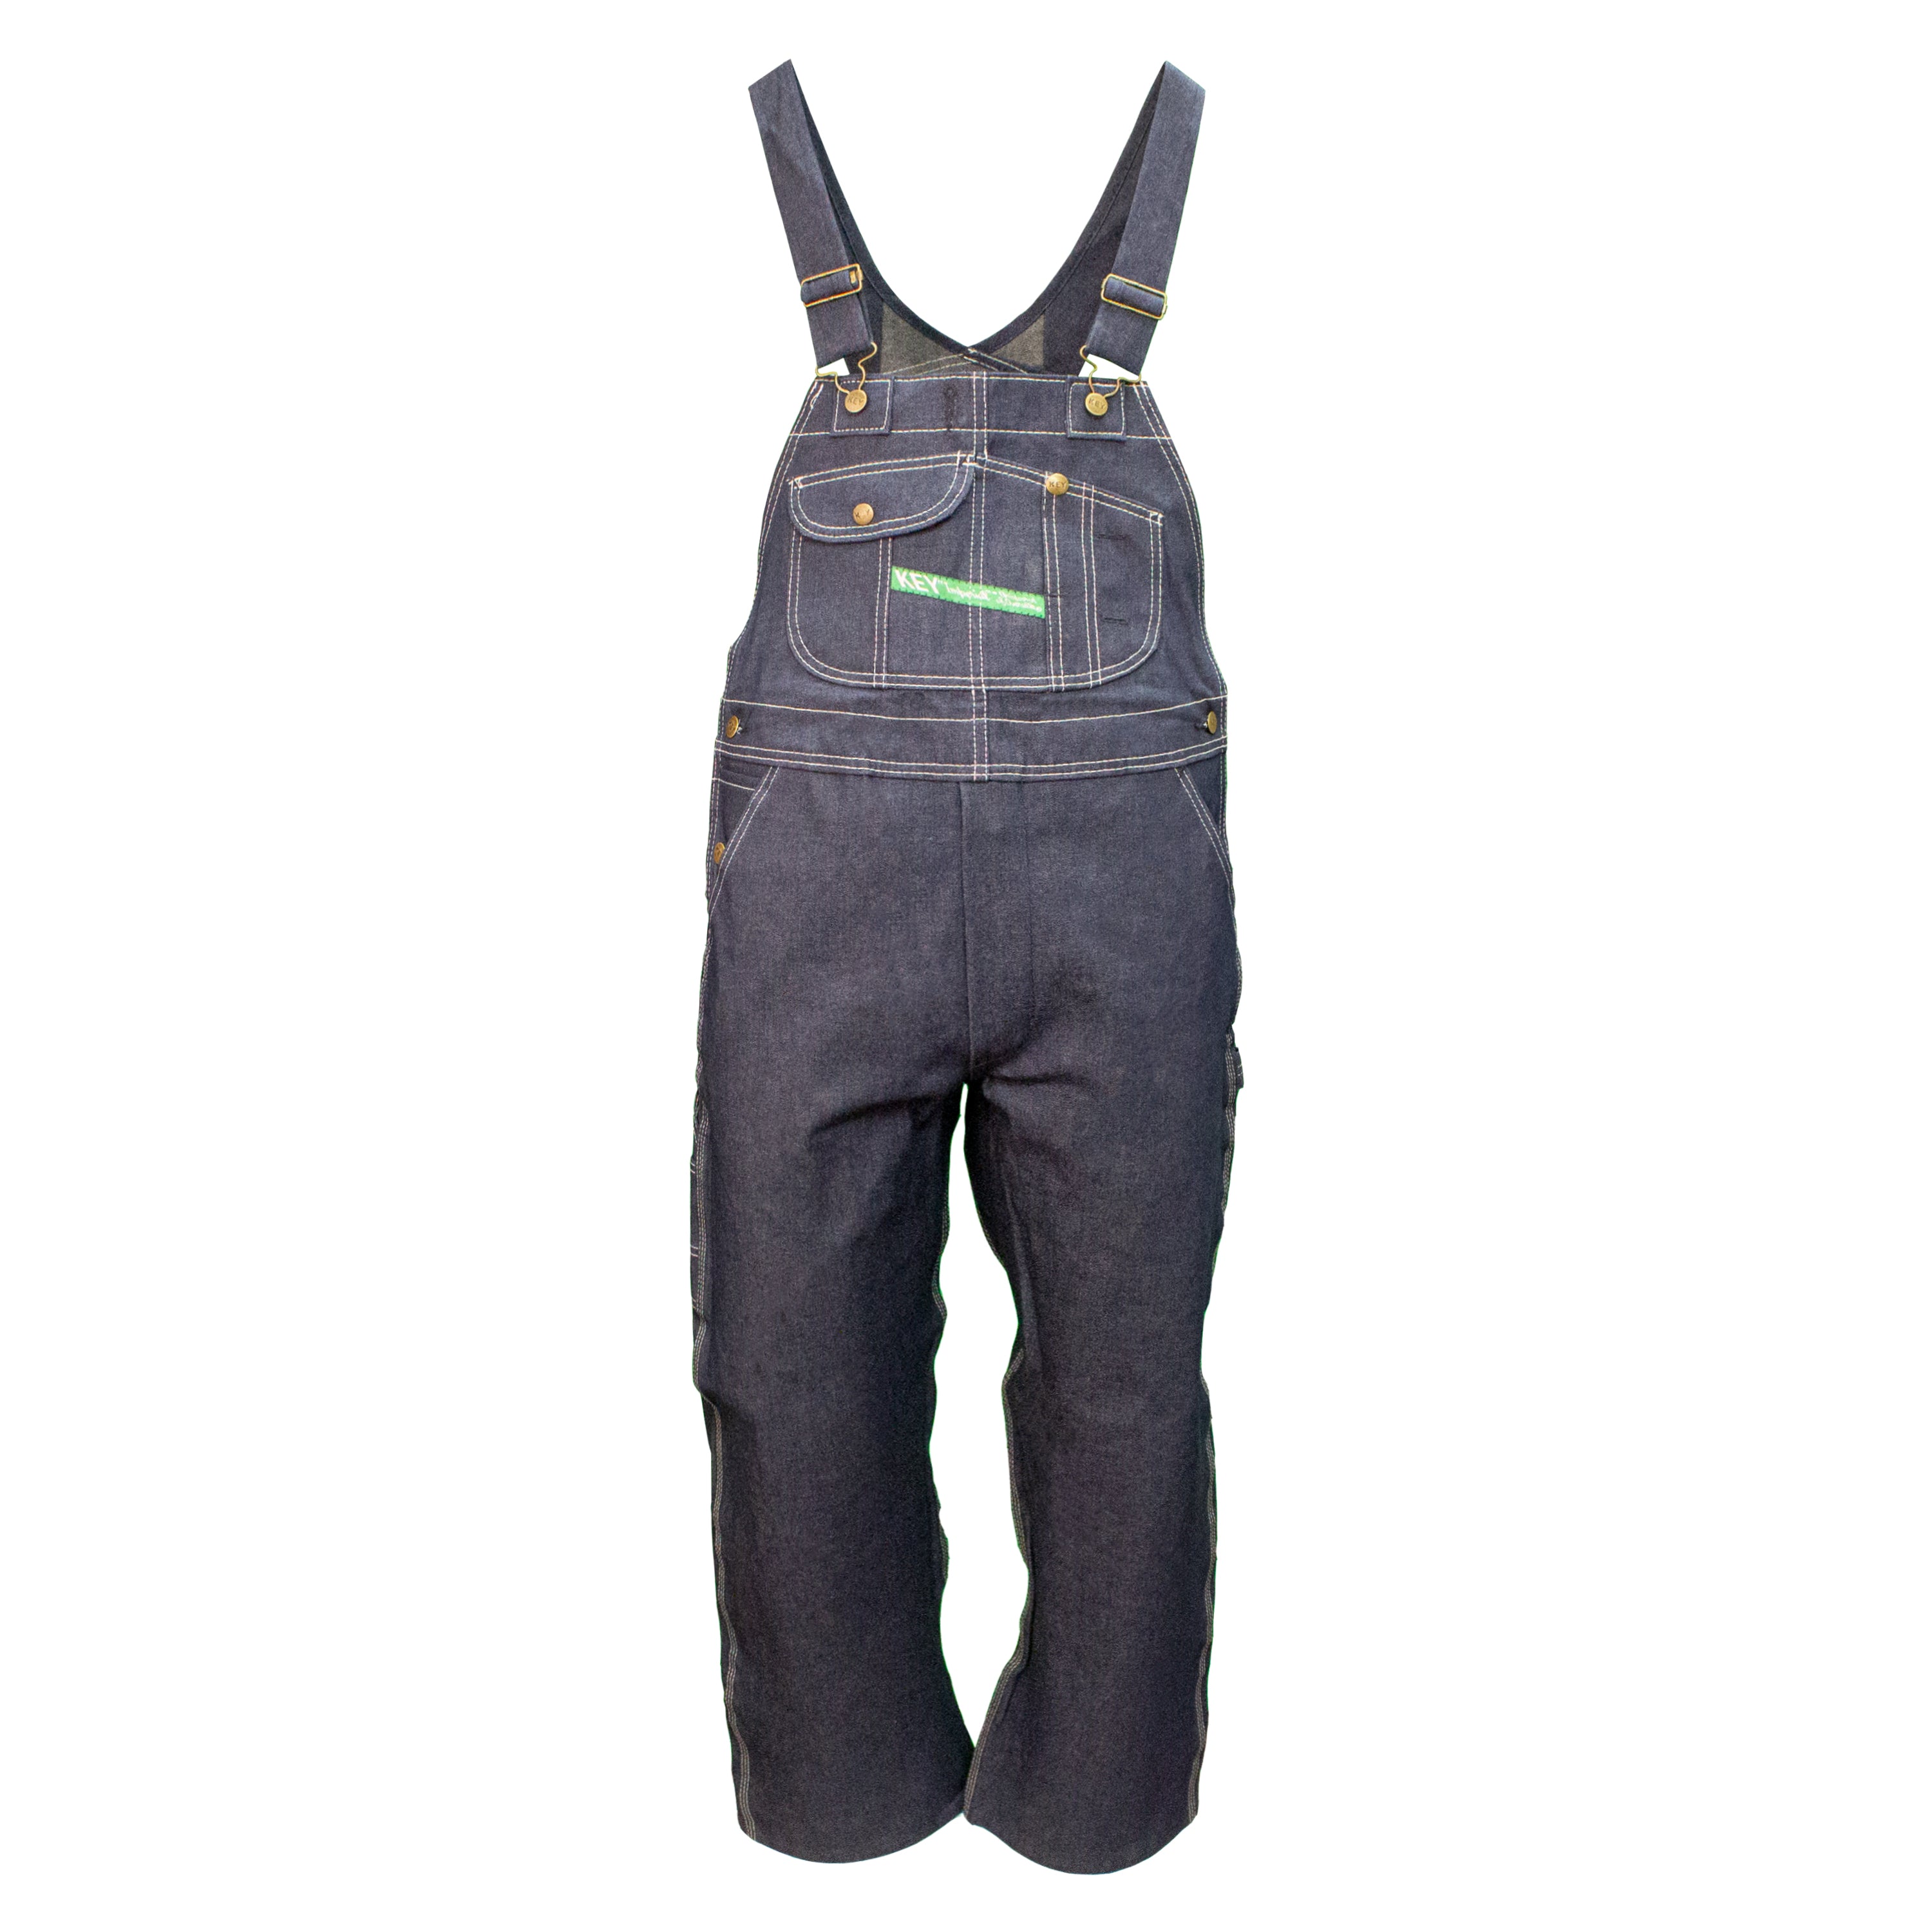 Buy LONGBIDA Men's Denim Bib Overalls Relaxed Fit Fashion Jean Jumpsuit  with Pockets, Blue, XX-Large at Amazon.in